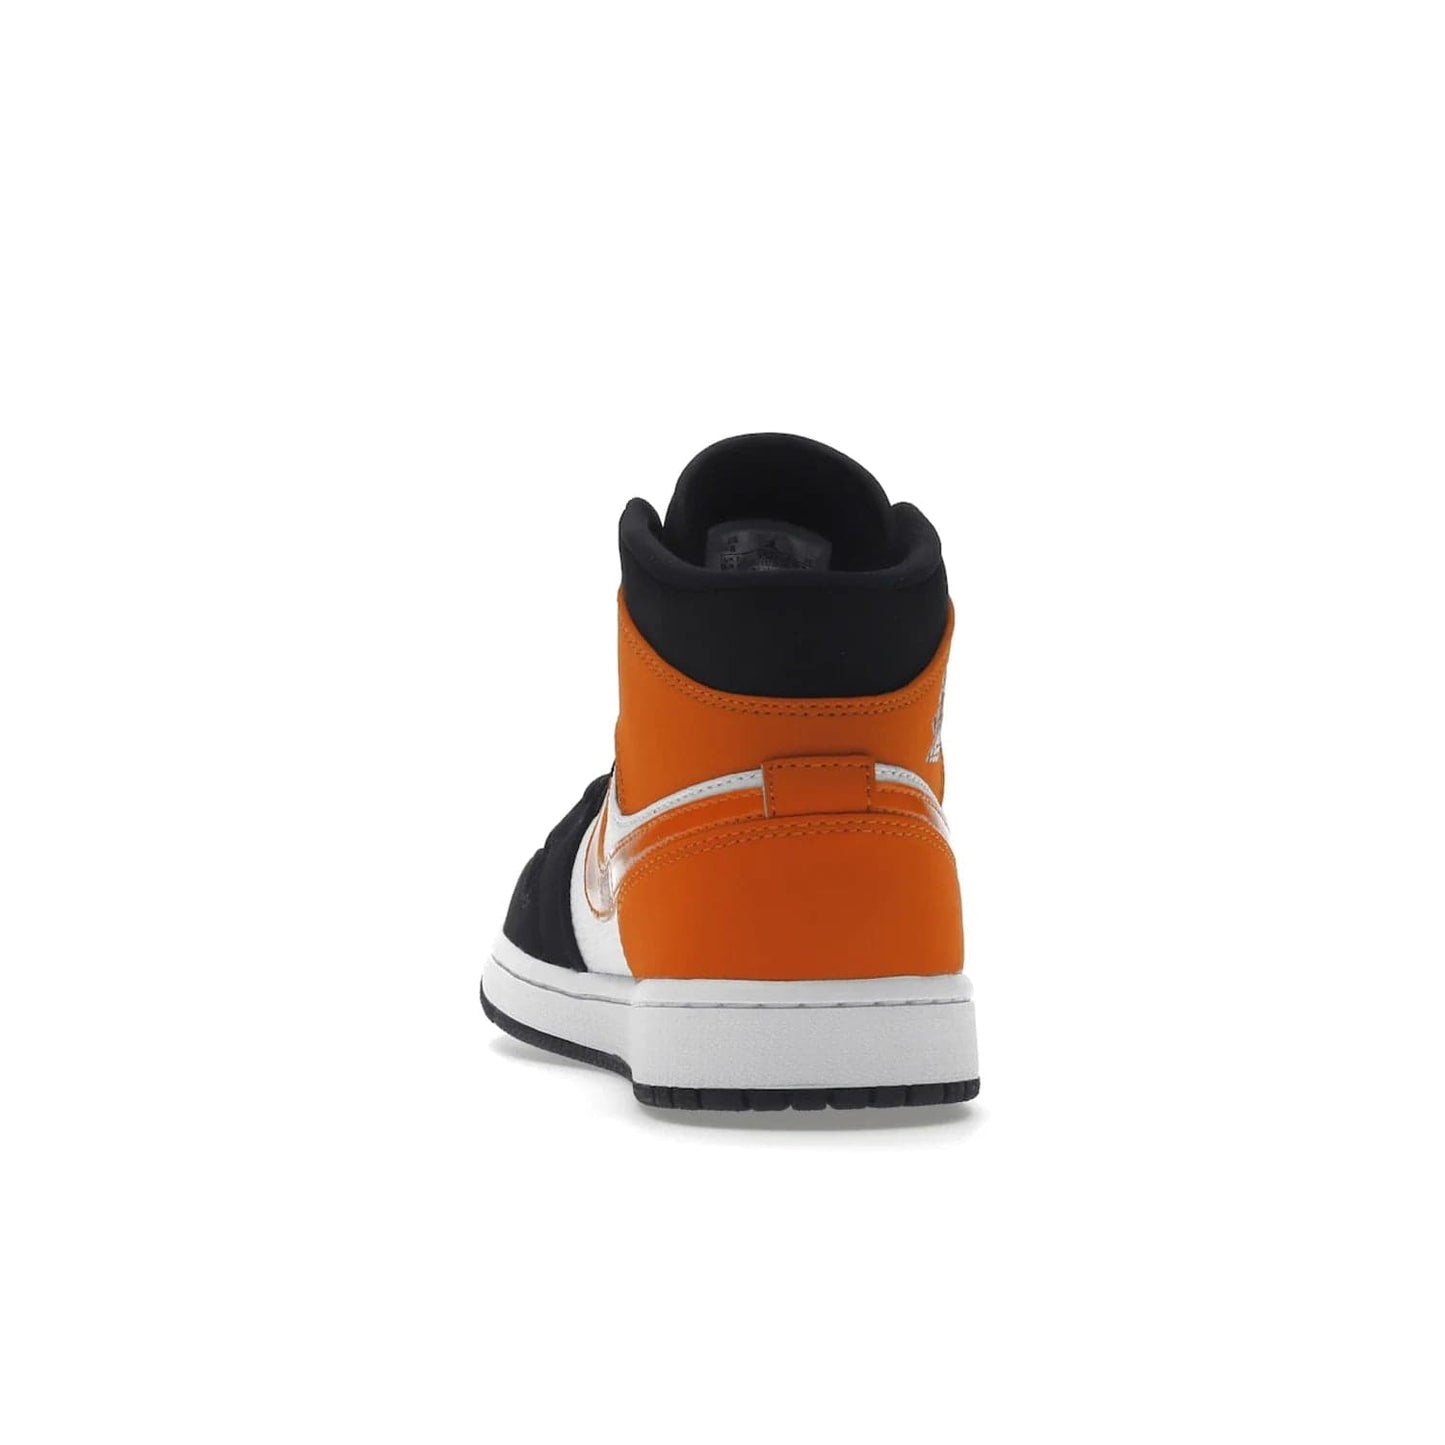 Jordan 1 Mid Shattered Backboard - Image 27 - Only at www.BallersClubKickz.com - The Air Jordan 1 Mid Shattered Backboard offers a timeless Black/White-Starfish colorway. Classic Swoosh logo and AJ insignia plus a shatterd backboard graphic on the insole. Get your pair today!